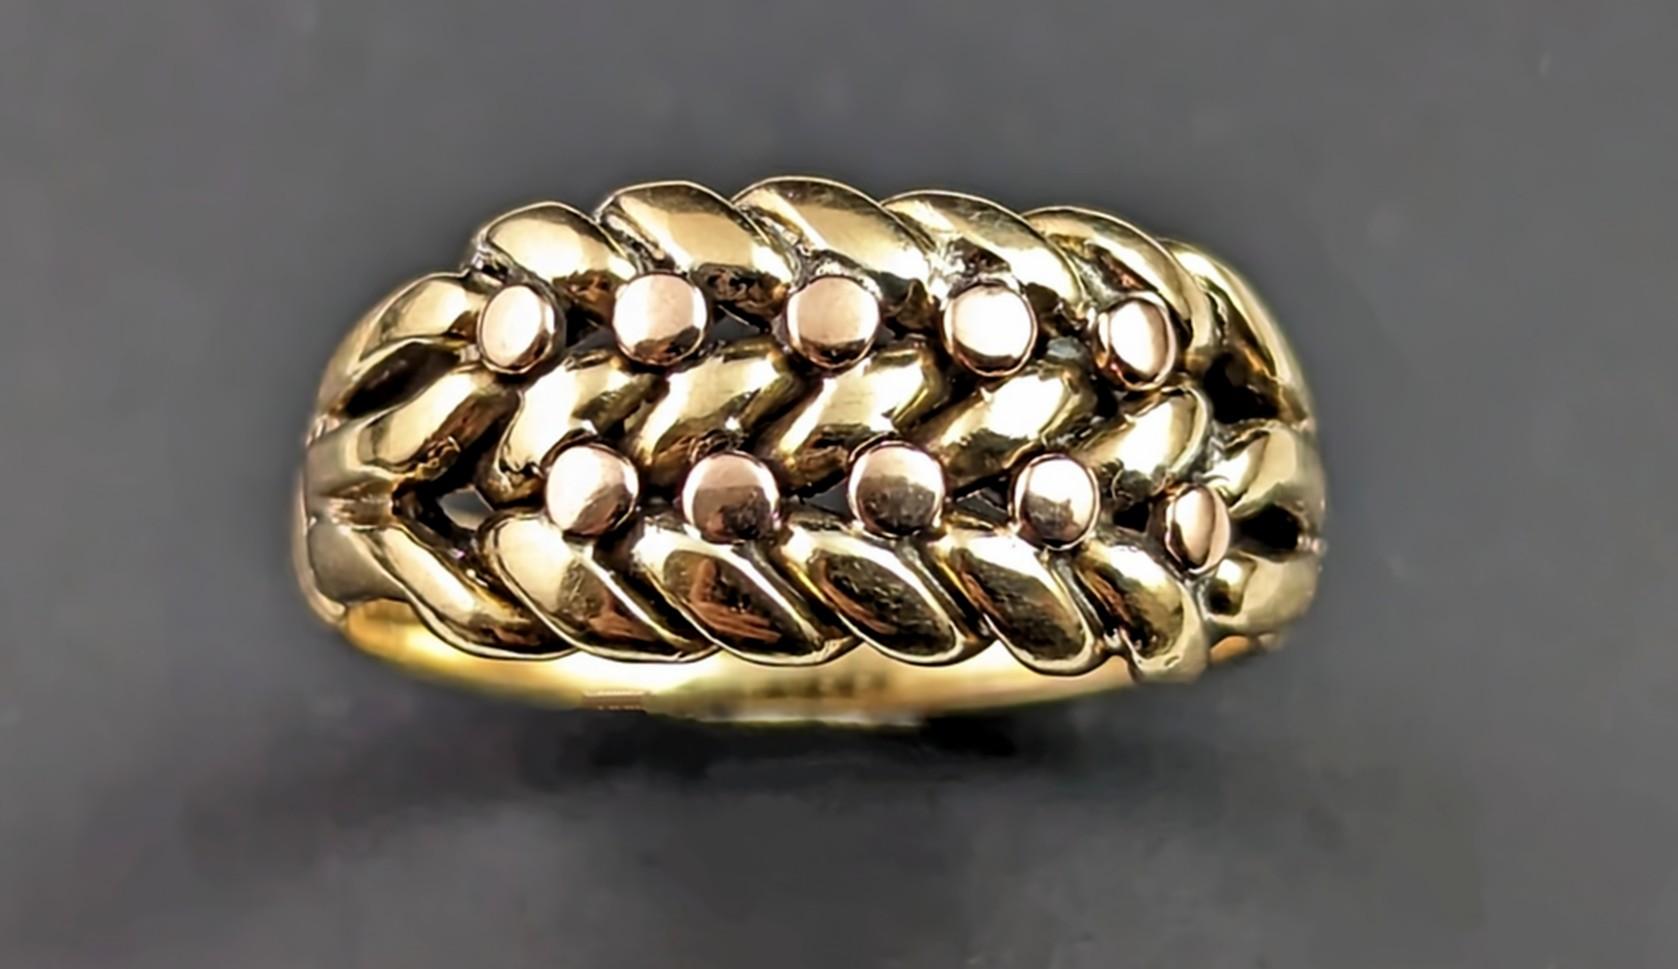 The keeper ring is a classic and highly sought after ring style, always in high demand and this antique Edwardian era 18k gold keeper ring is one of our favourites.

The face is made up from a scrolling knot with rose gold beading, this ring is very